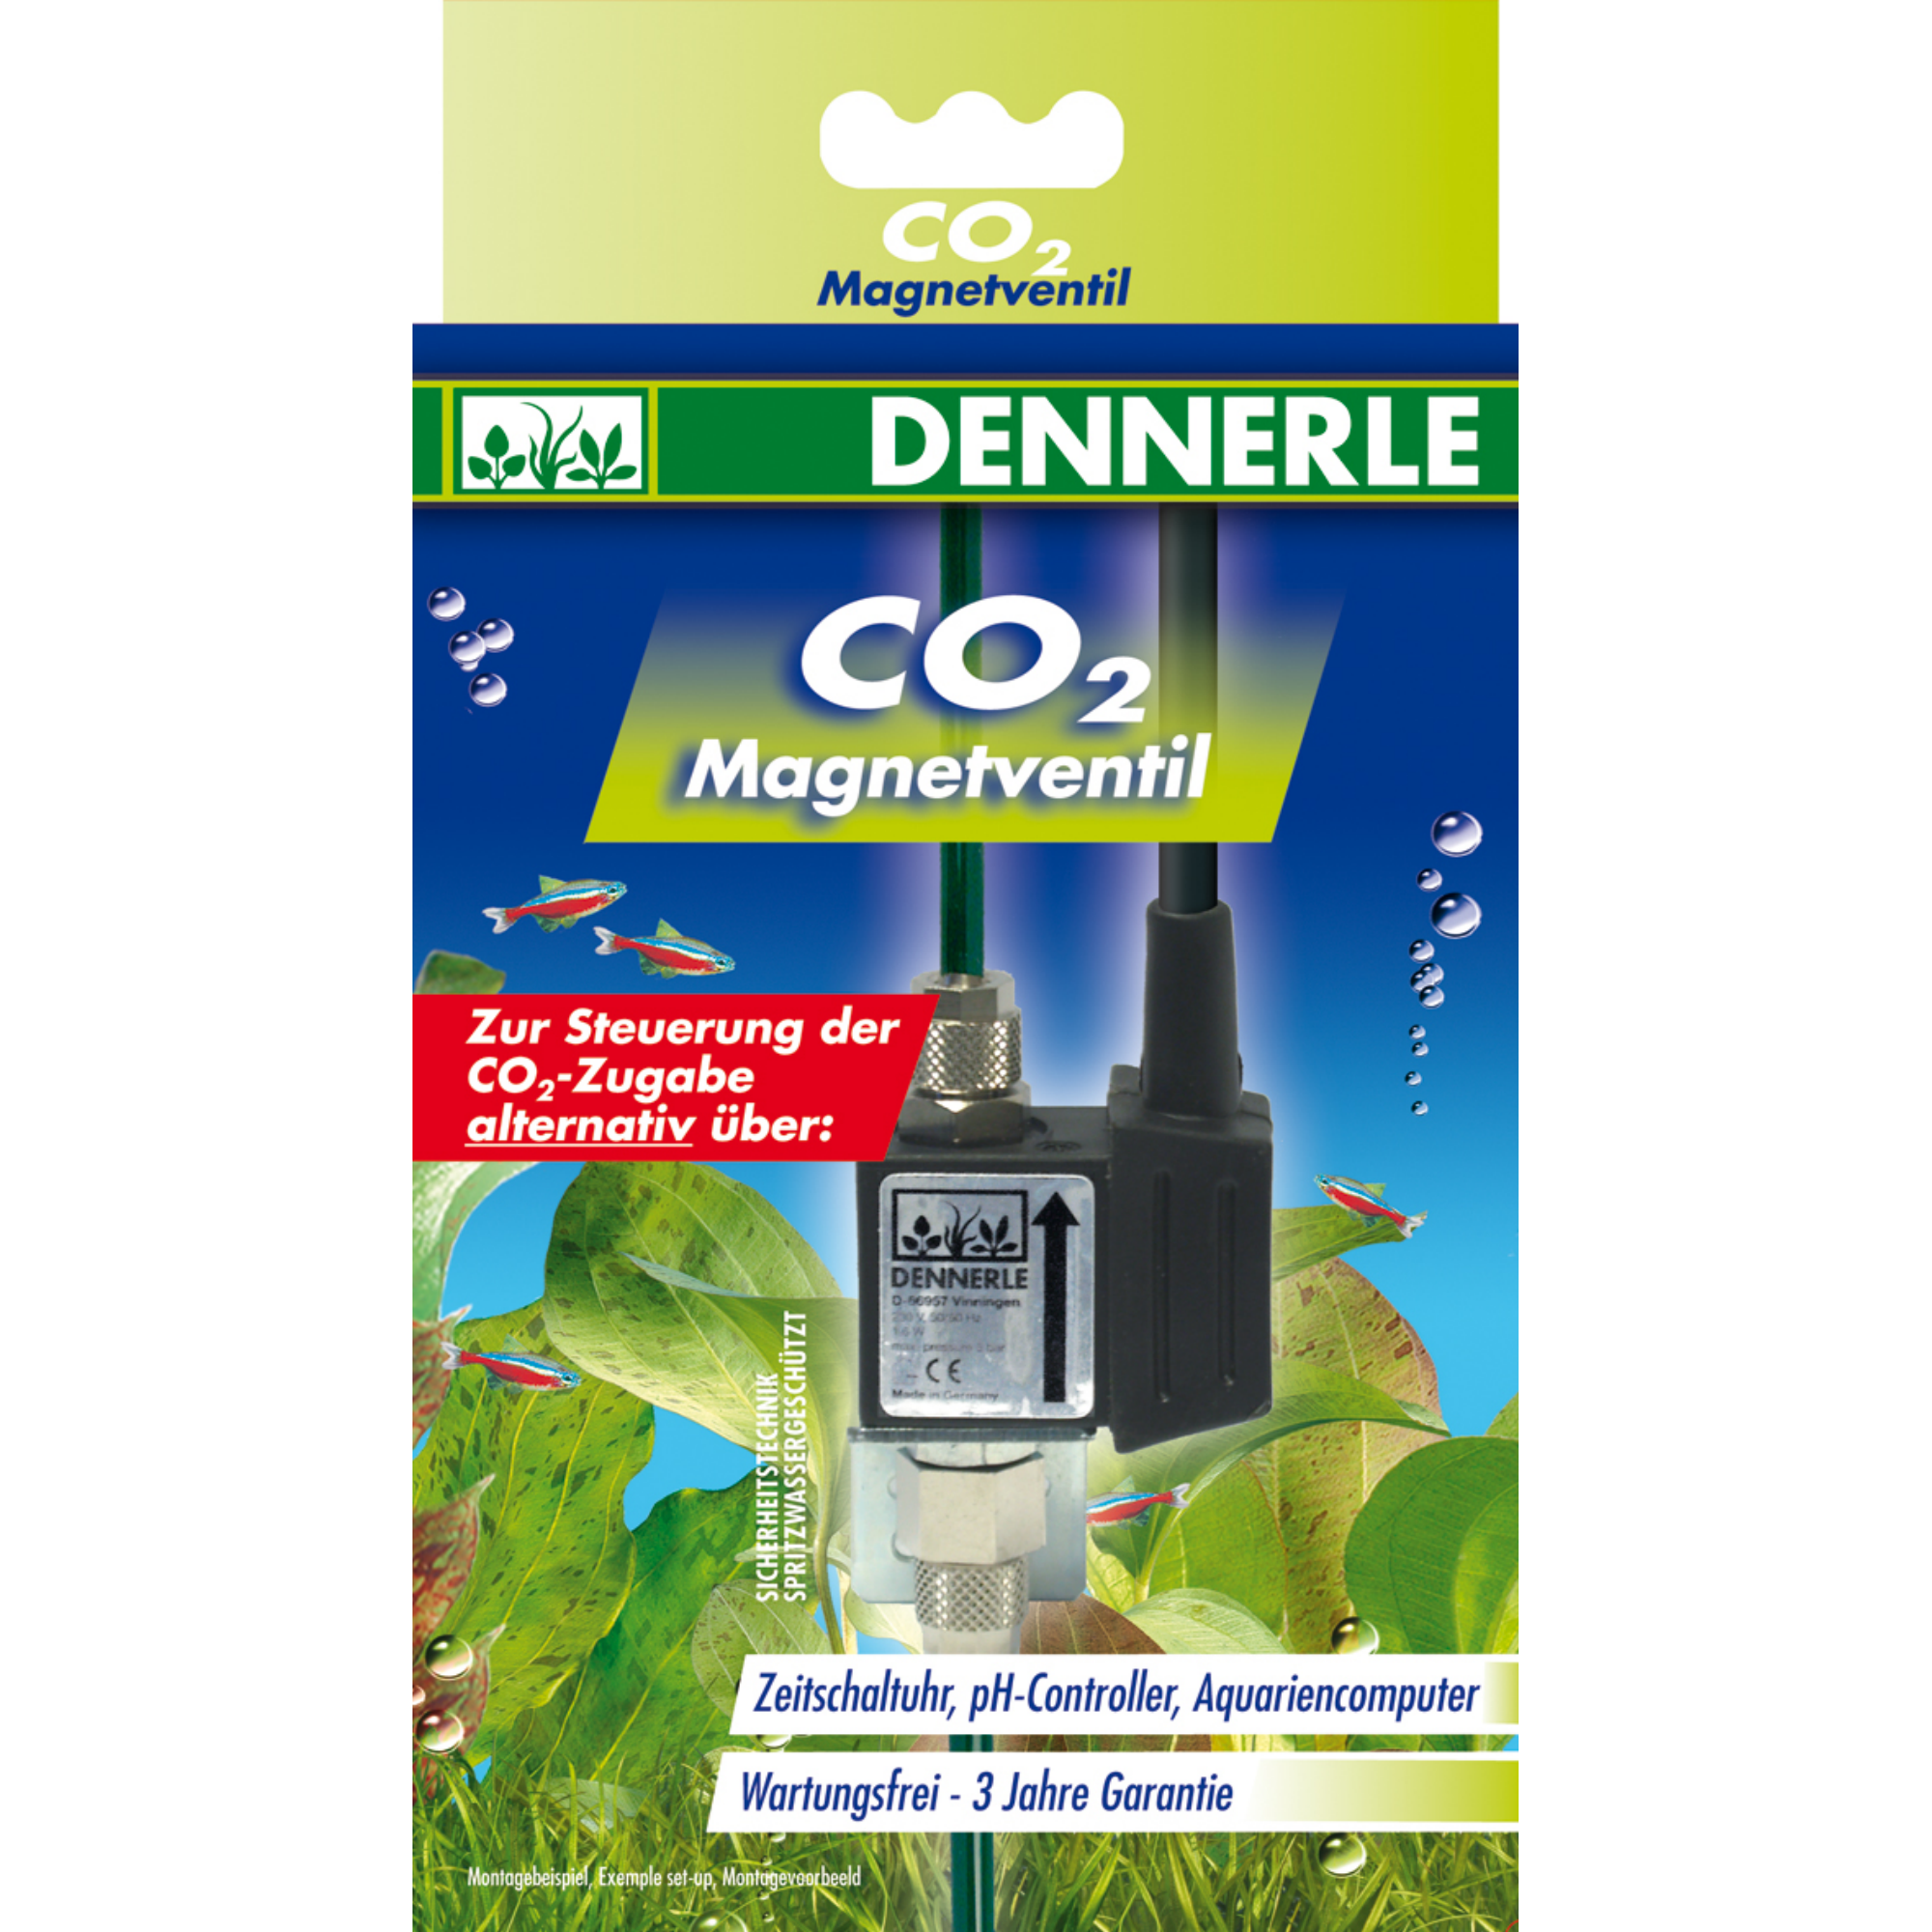 CO2 Magnetventil + product picture